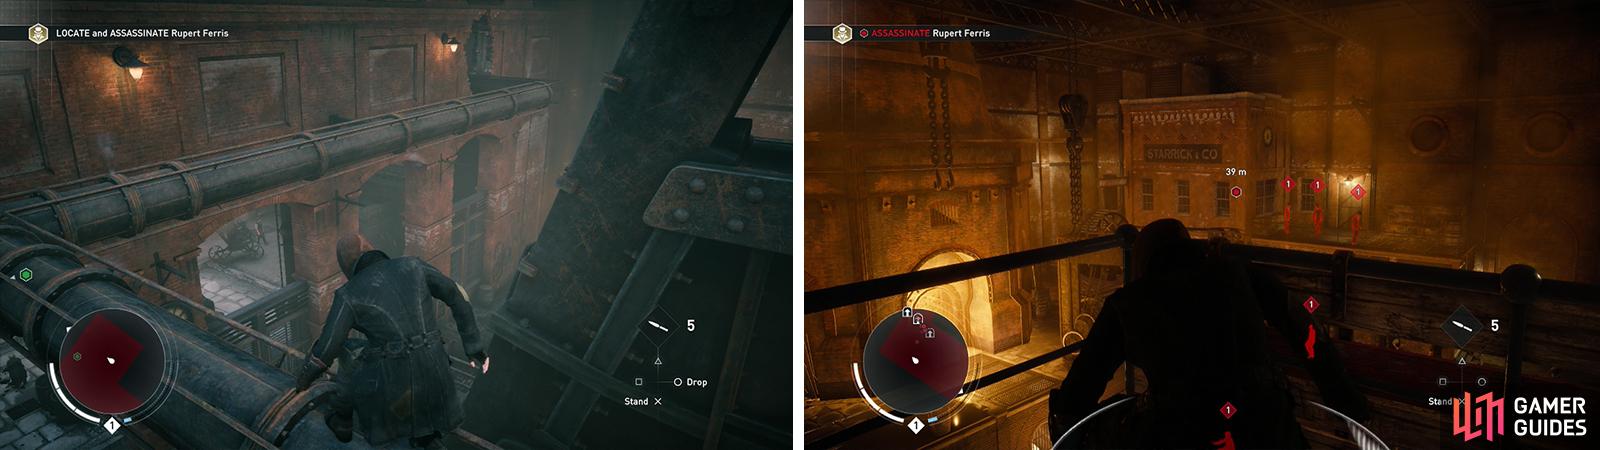 The pipe at the top of the room is the sneakiest way in (left). Keep moving through the foundry until you reach the room with the target (right).